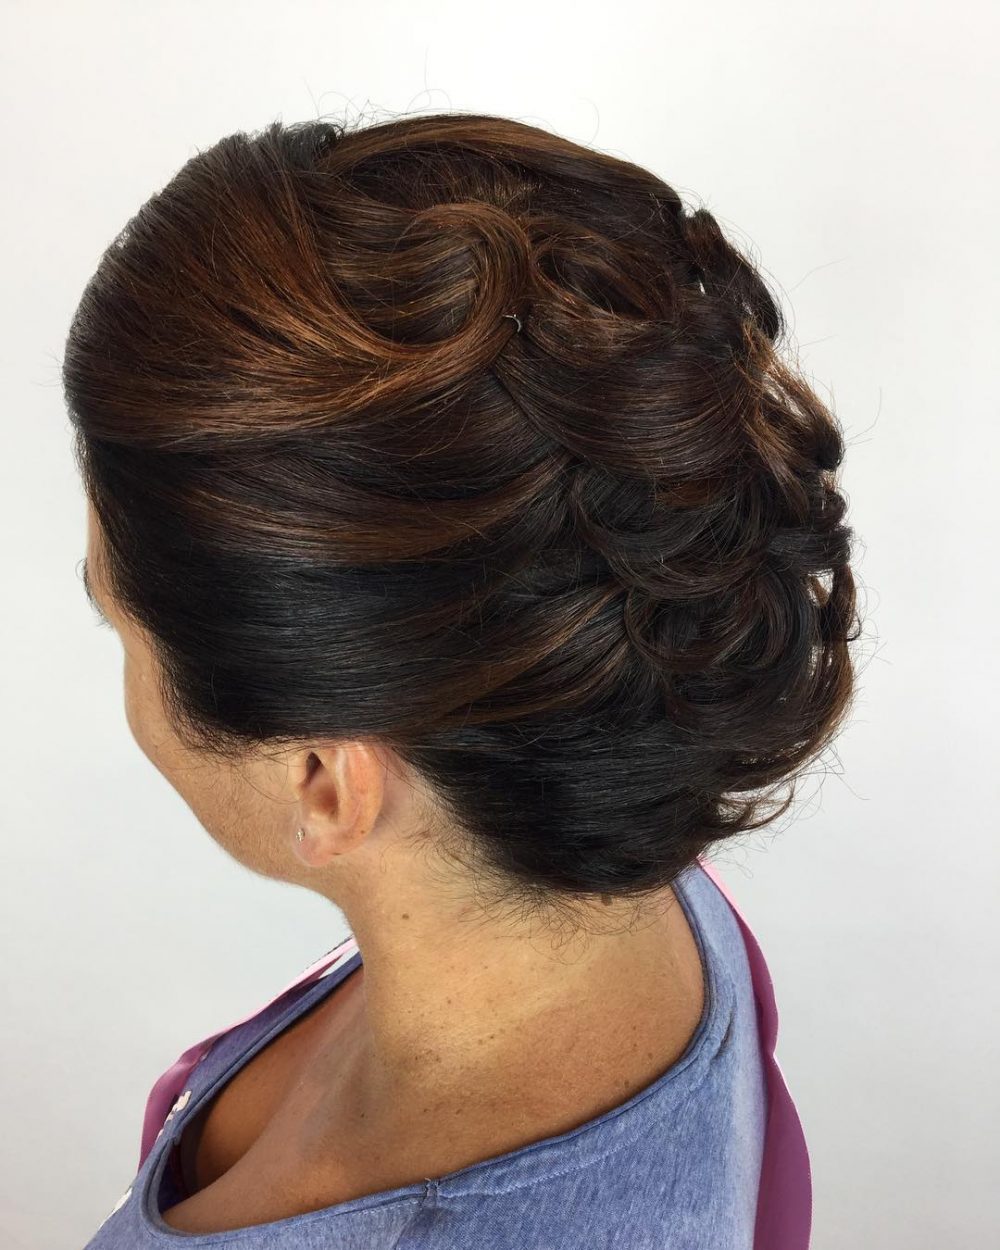 Our 28 Favorite Wedding Hairstyles for Short Hair